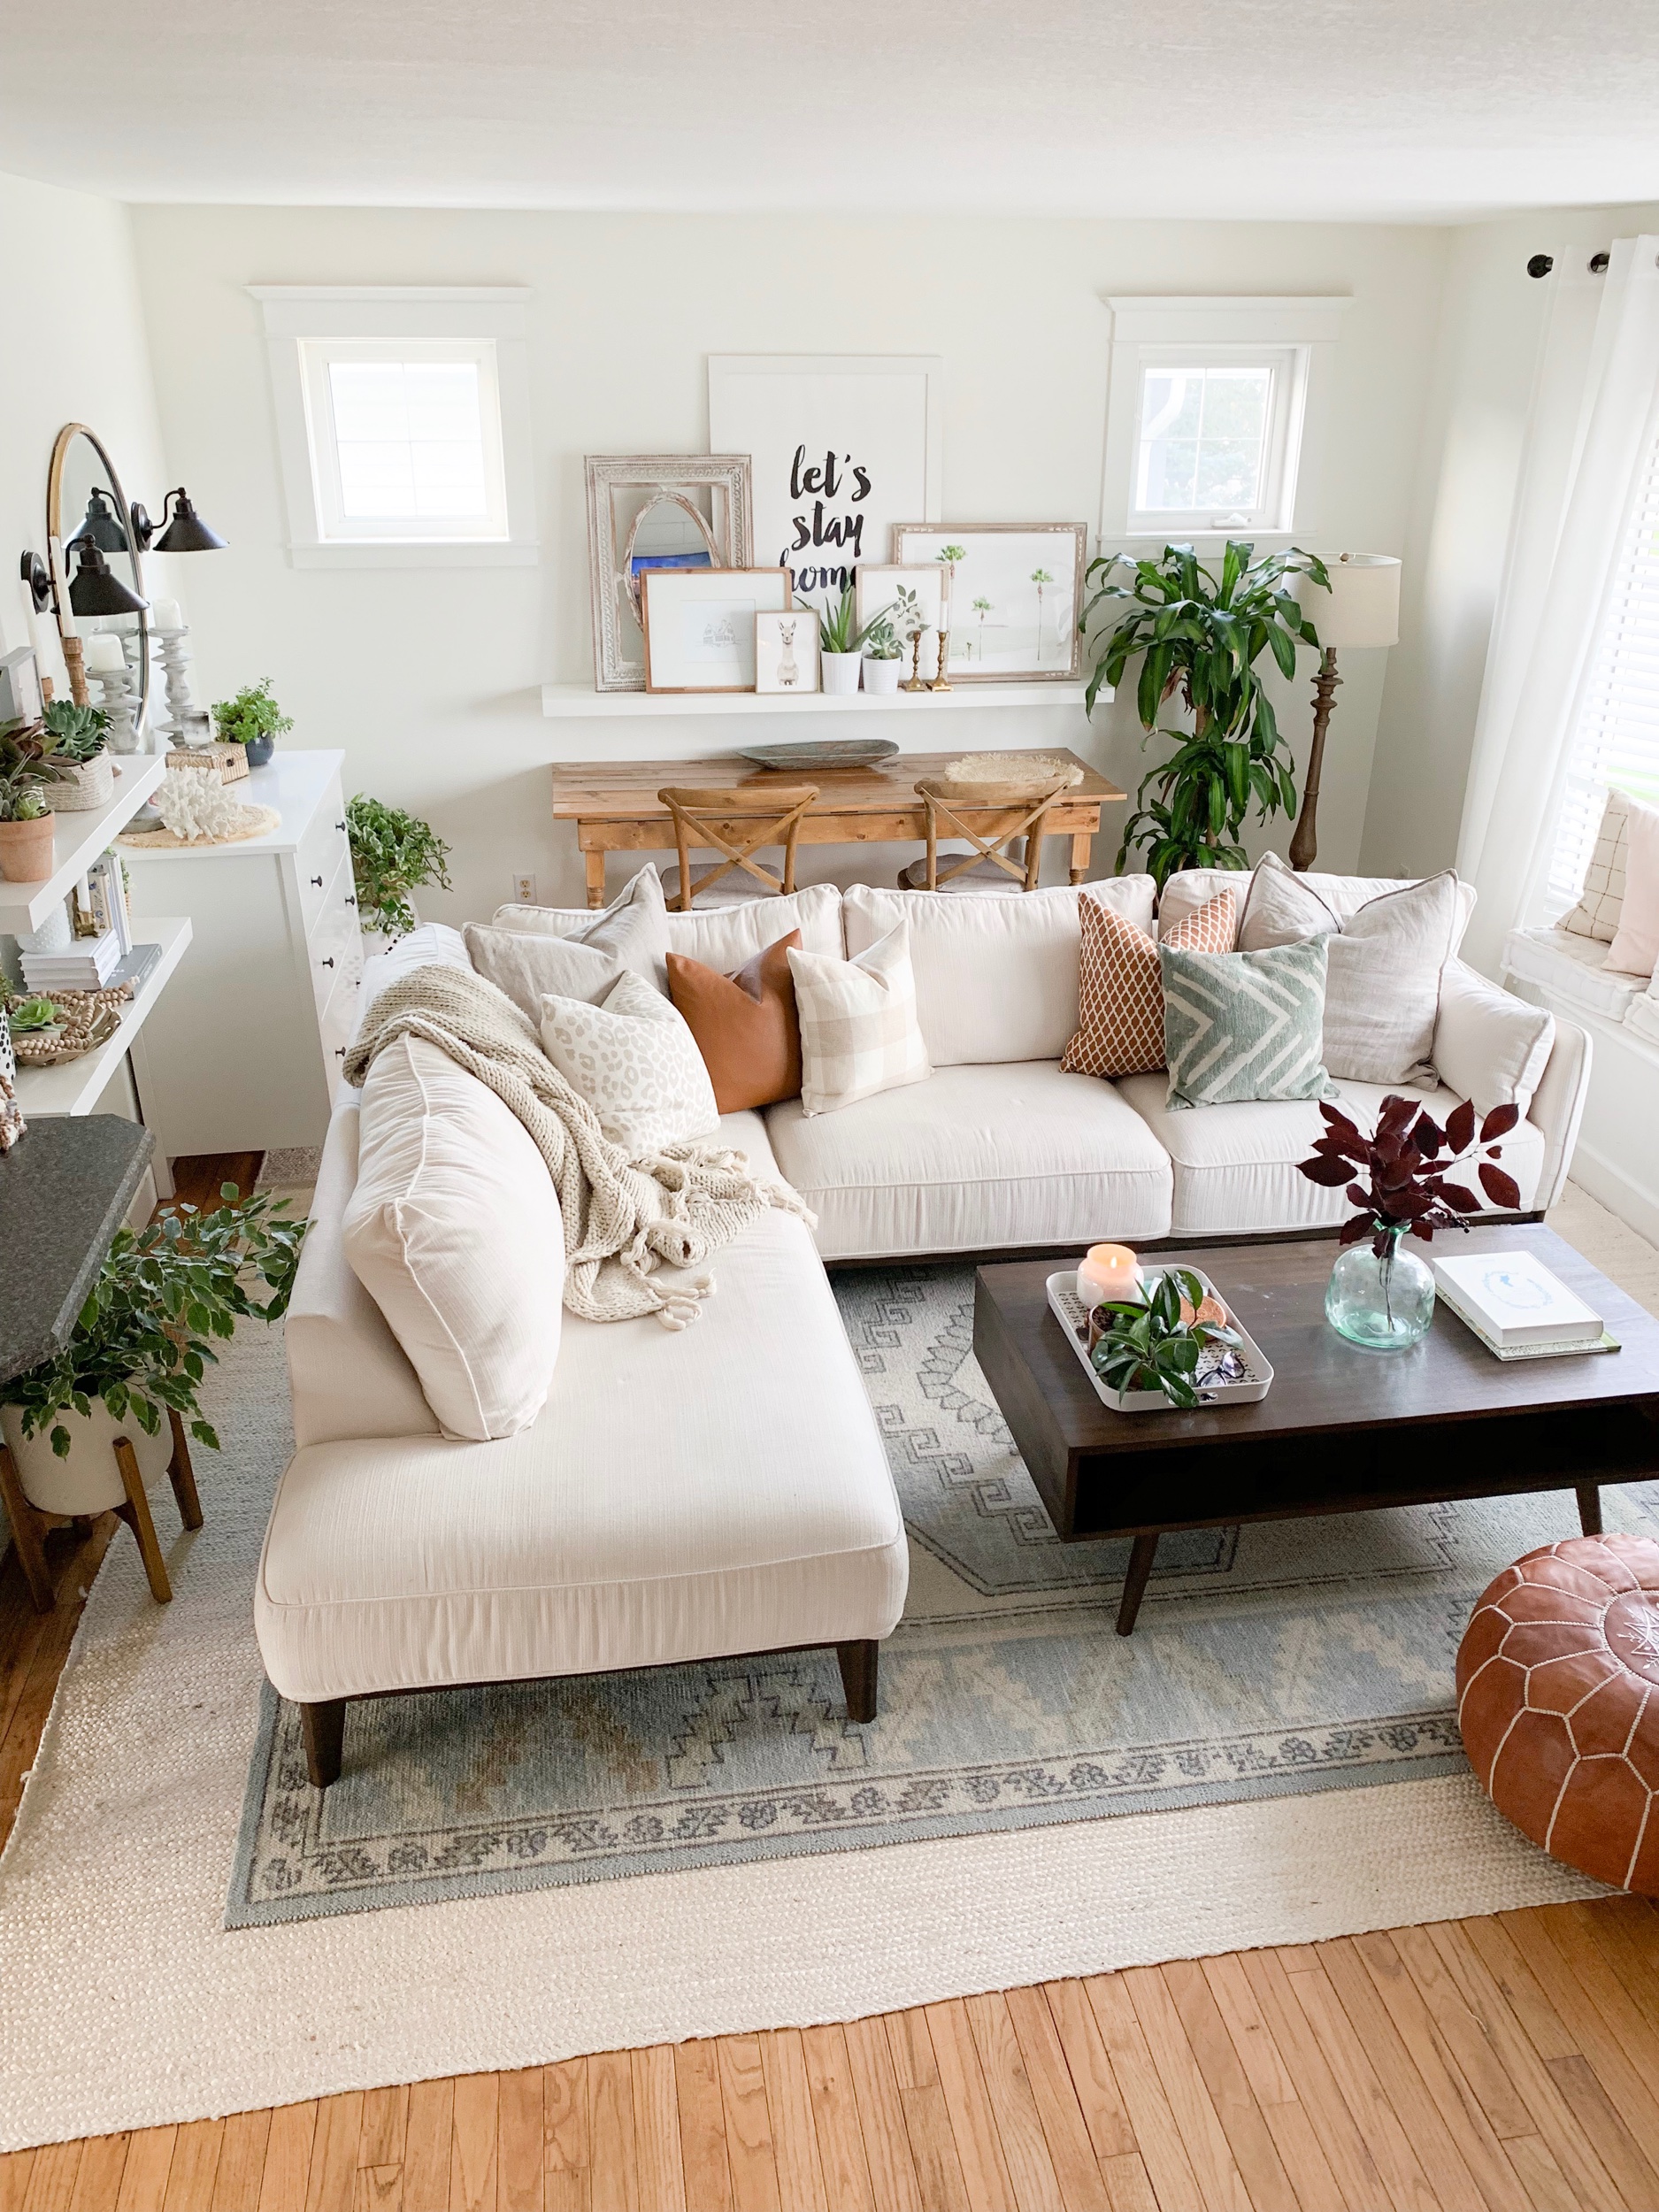 White Sectional Decor Boho Design, Living Room Ideas With Sectional